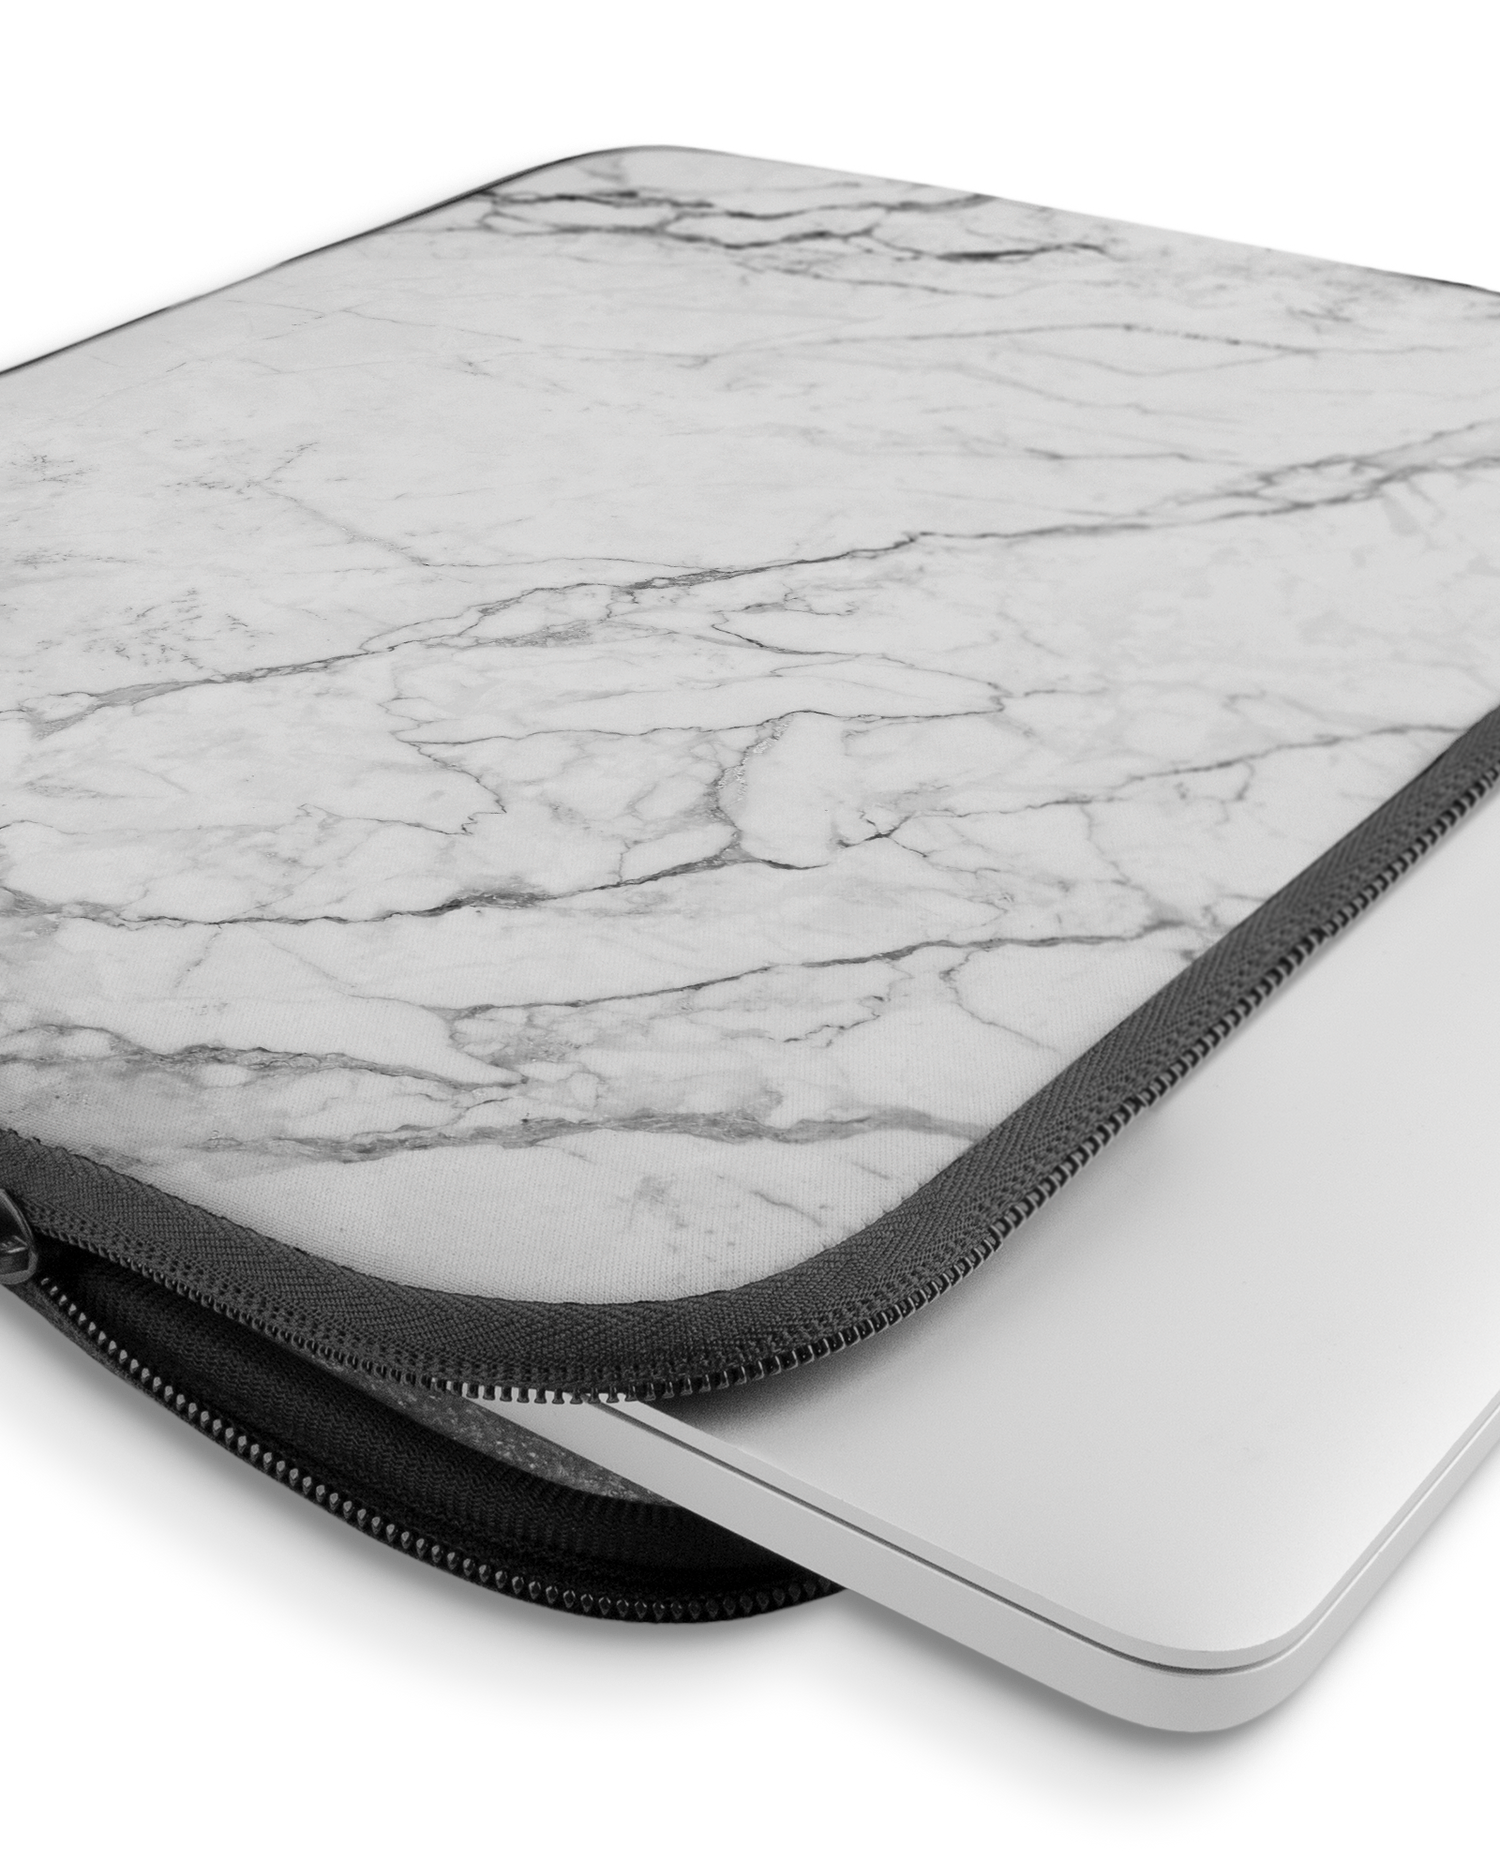 White Marble Laptop Case 15 inch with device inside